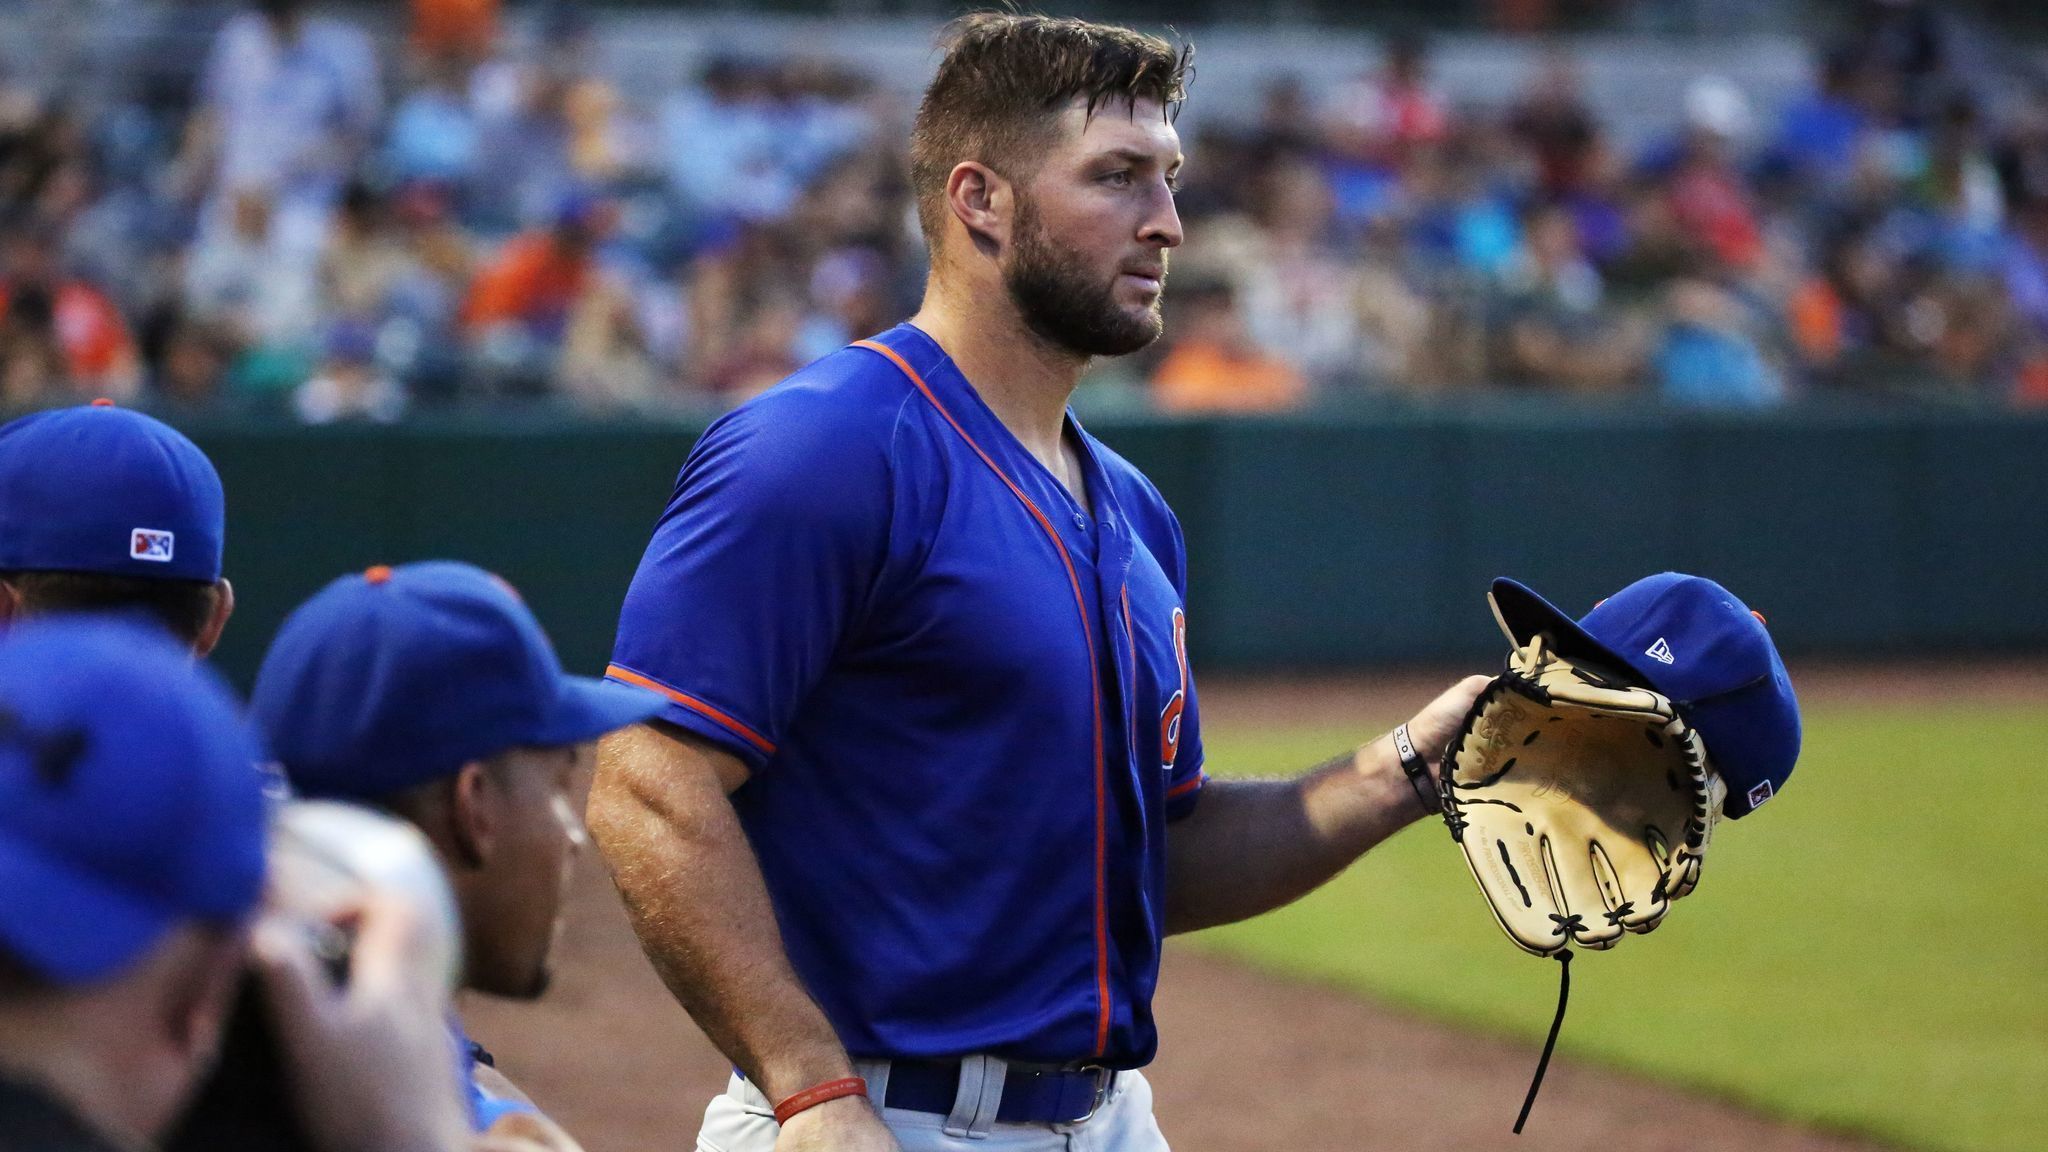 Tim Tebow goes hitless in series finale at Osceola County Stadium - Orlando Sentinel